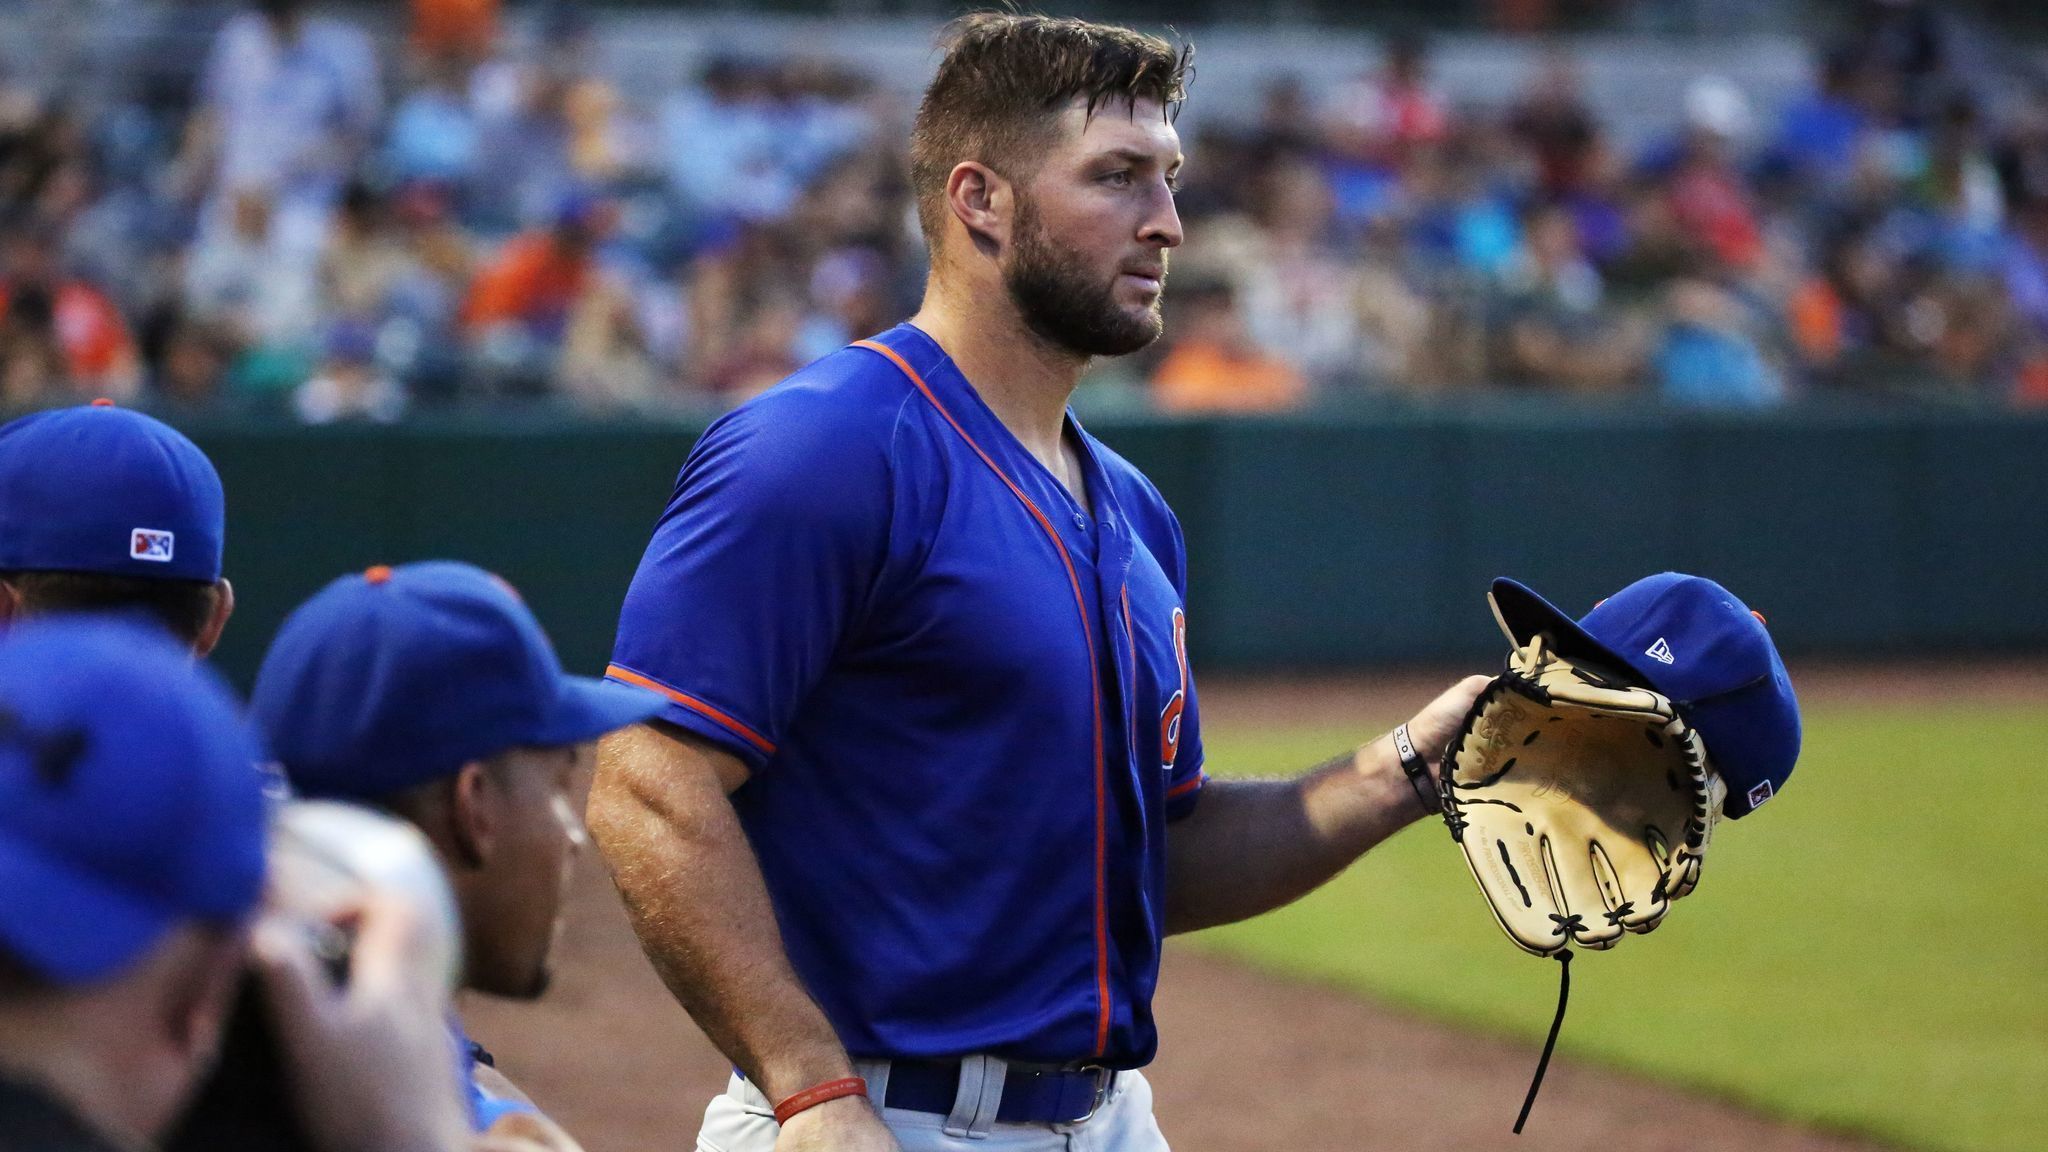 Tim Tebow goes hitless in series finale at Osceola County Stadium - Orlando Sentinel